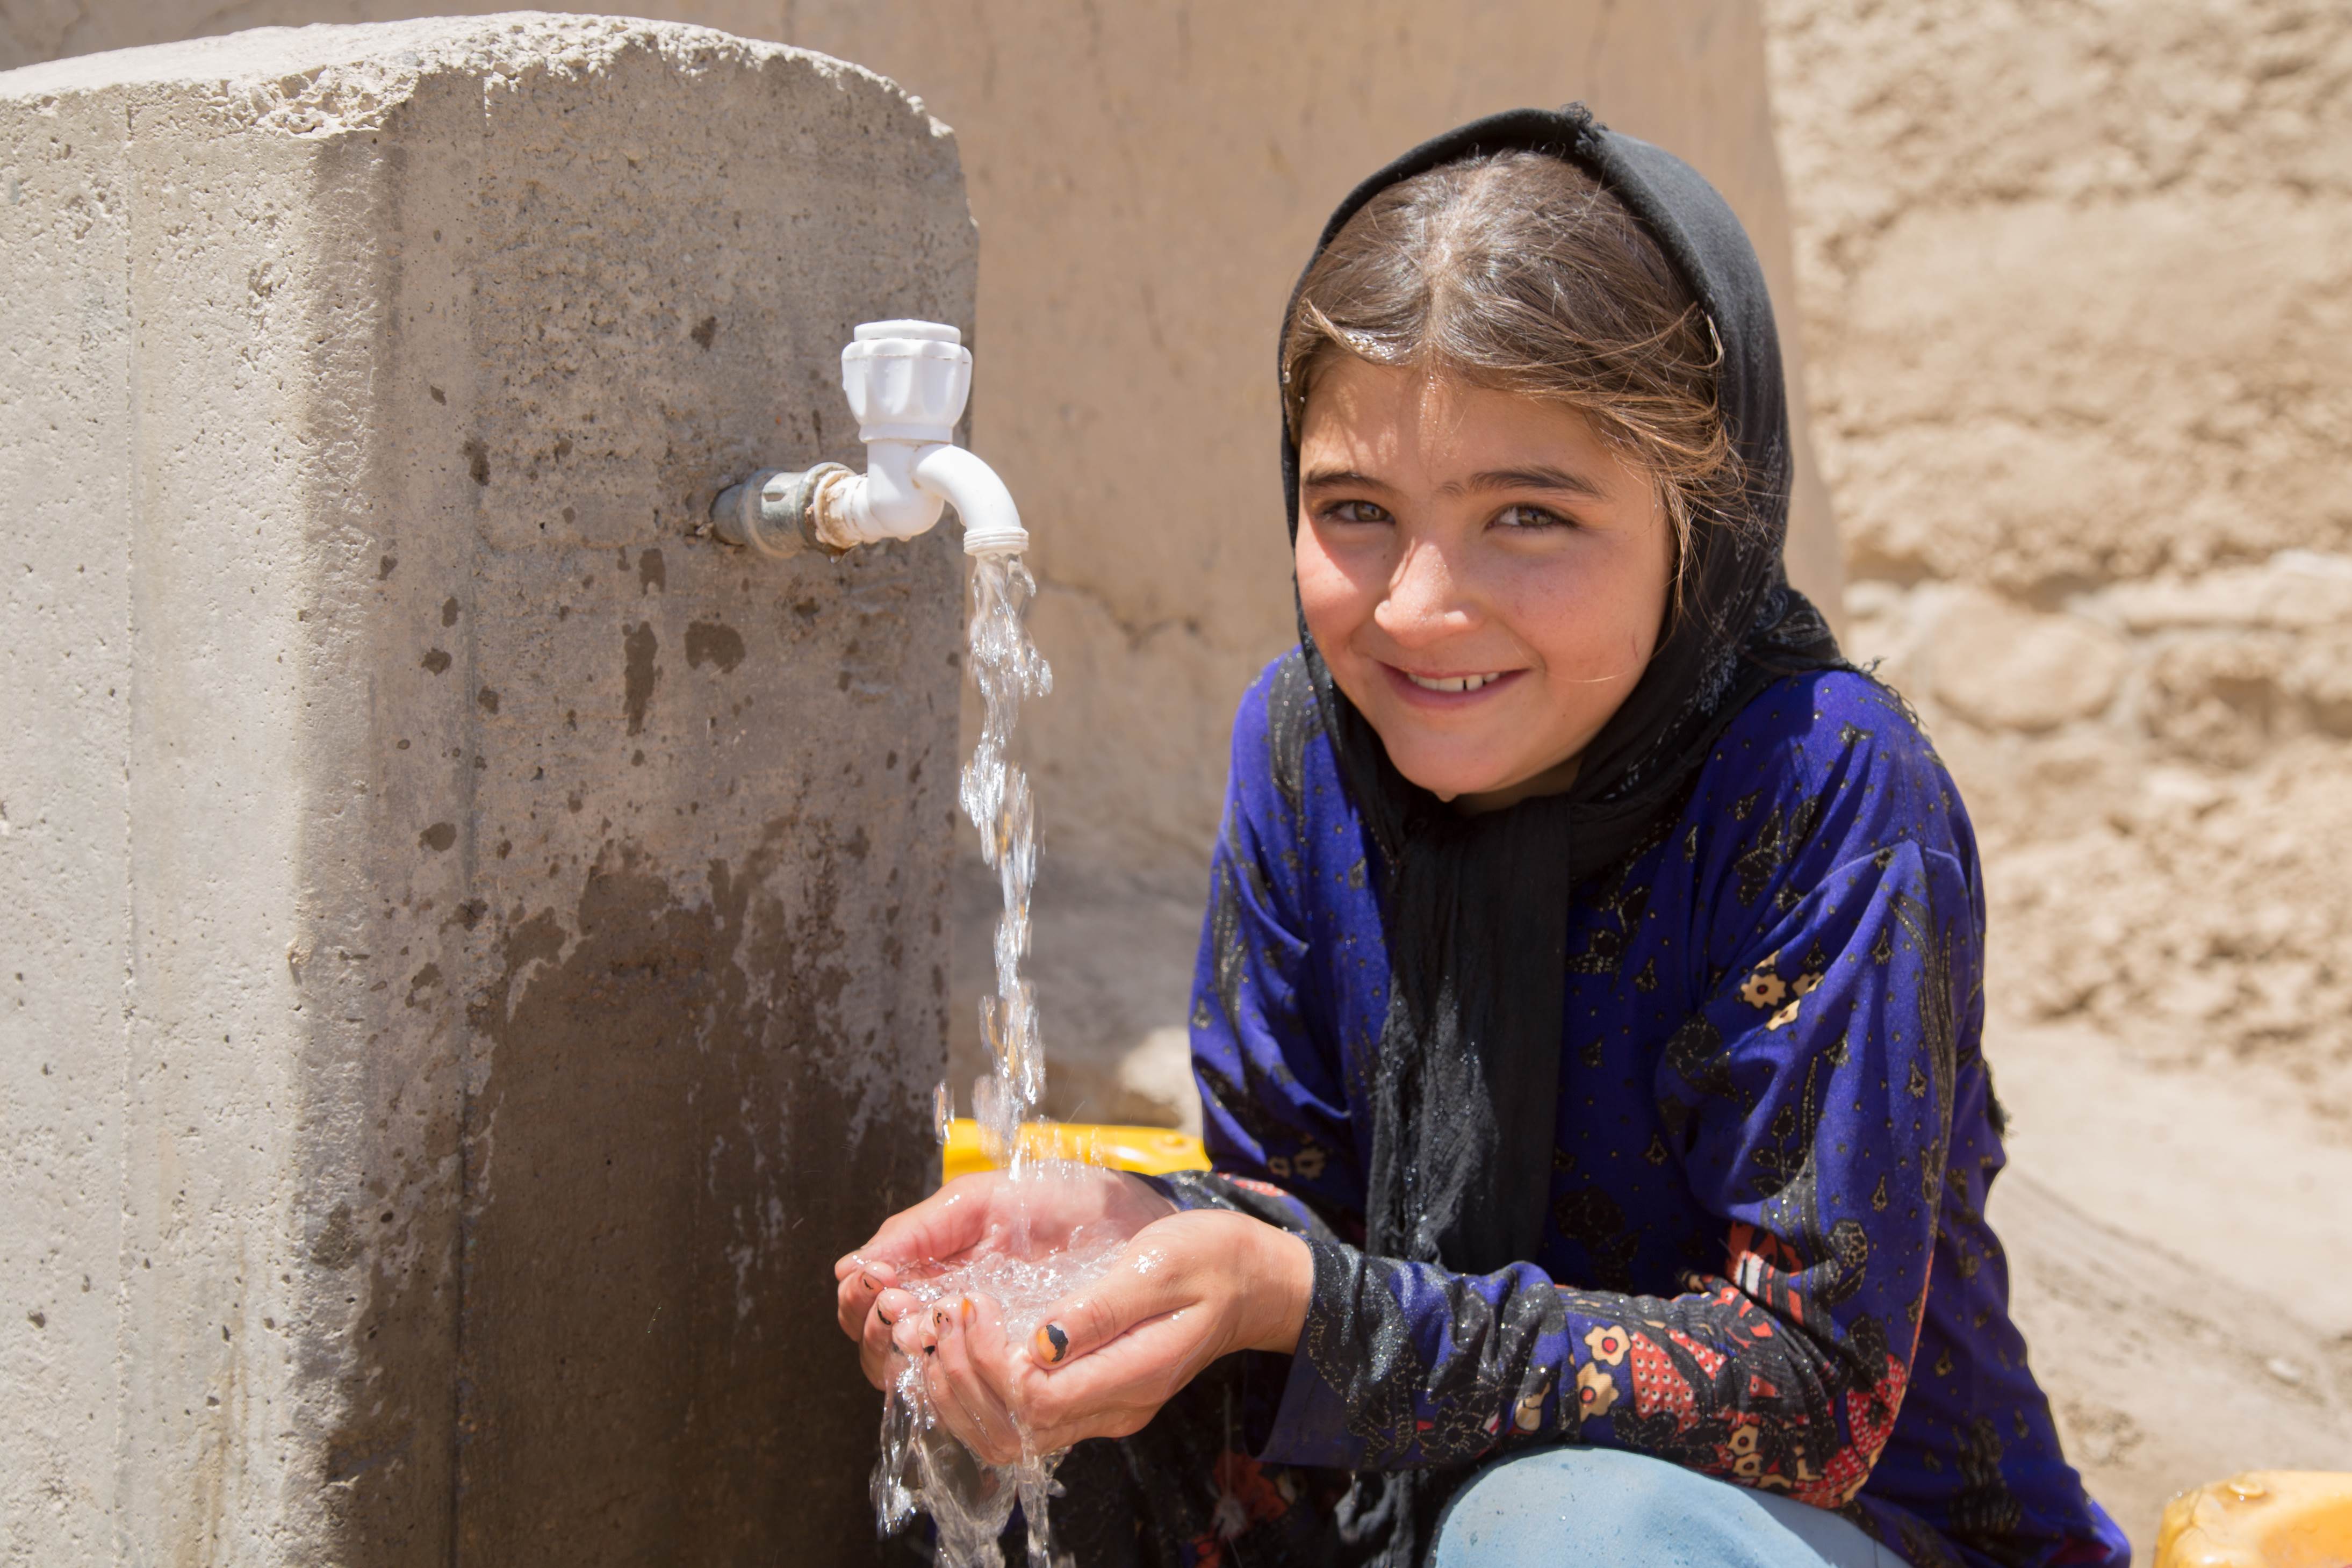 Afghan girl smiles as she washes her hands in clean water from a World Vision established solar-powered, filtered water source